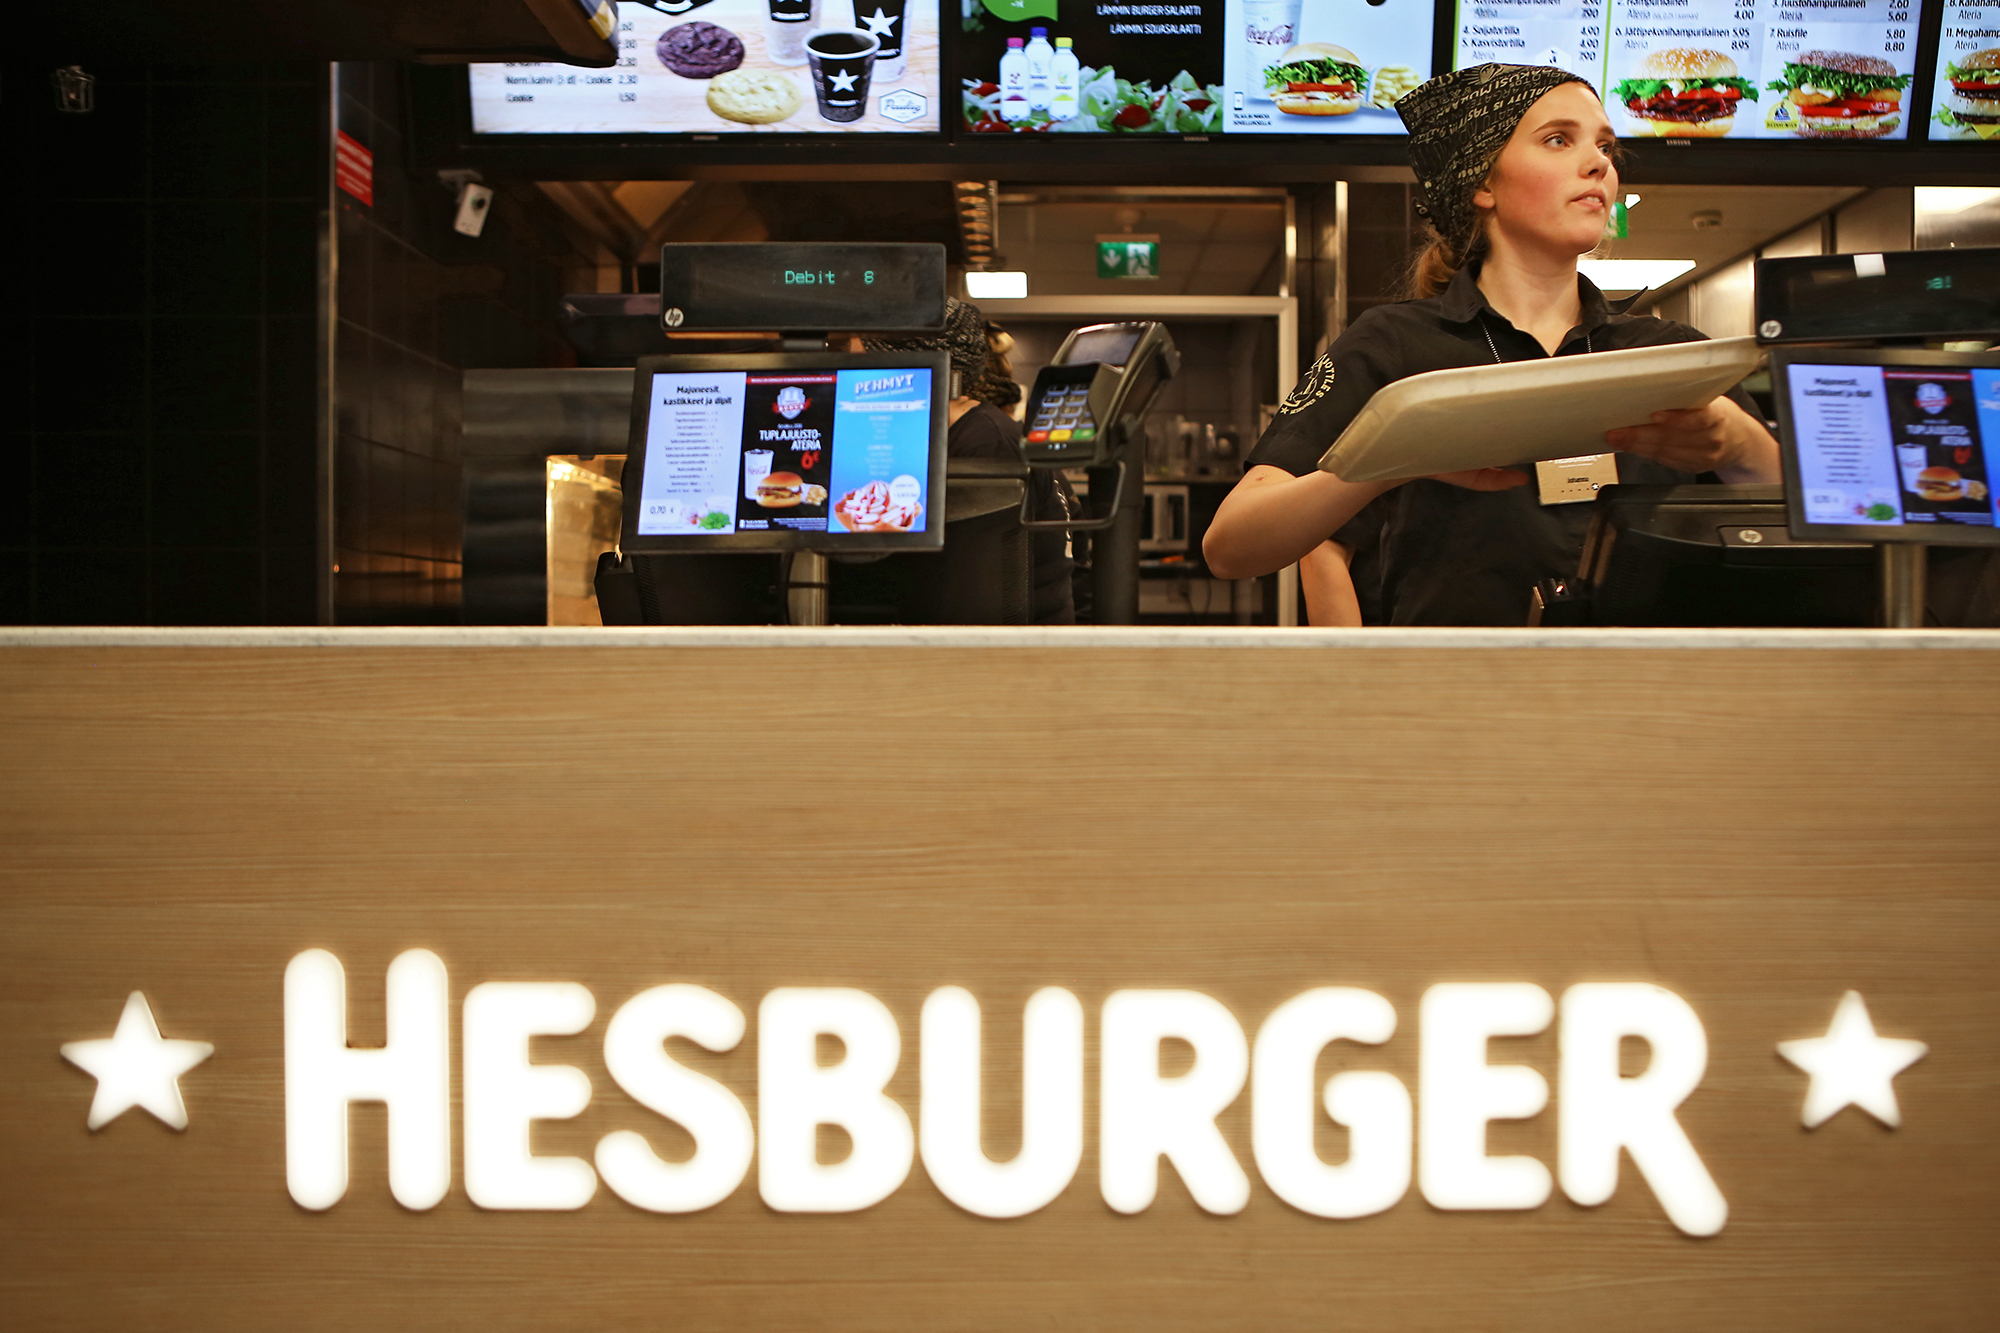 Finnish fast food giant Hesburger reports on sales levels prior to Covid